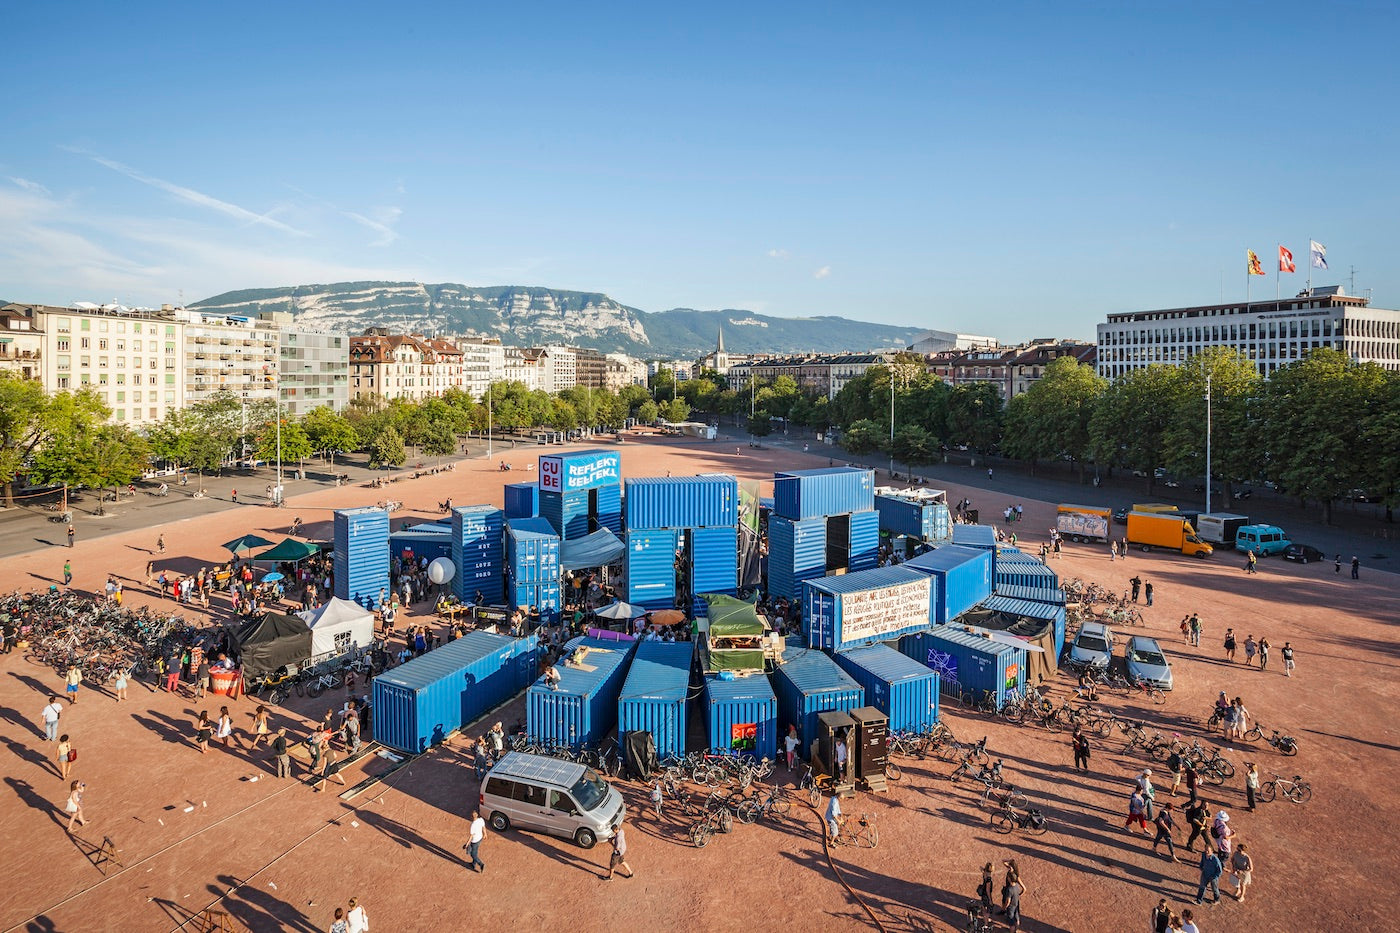 Containers: From The Docks To An Architectural Spectacle